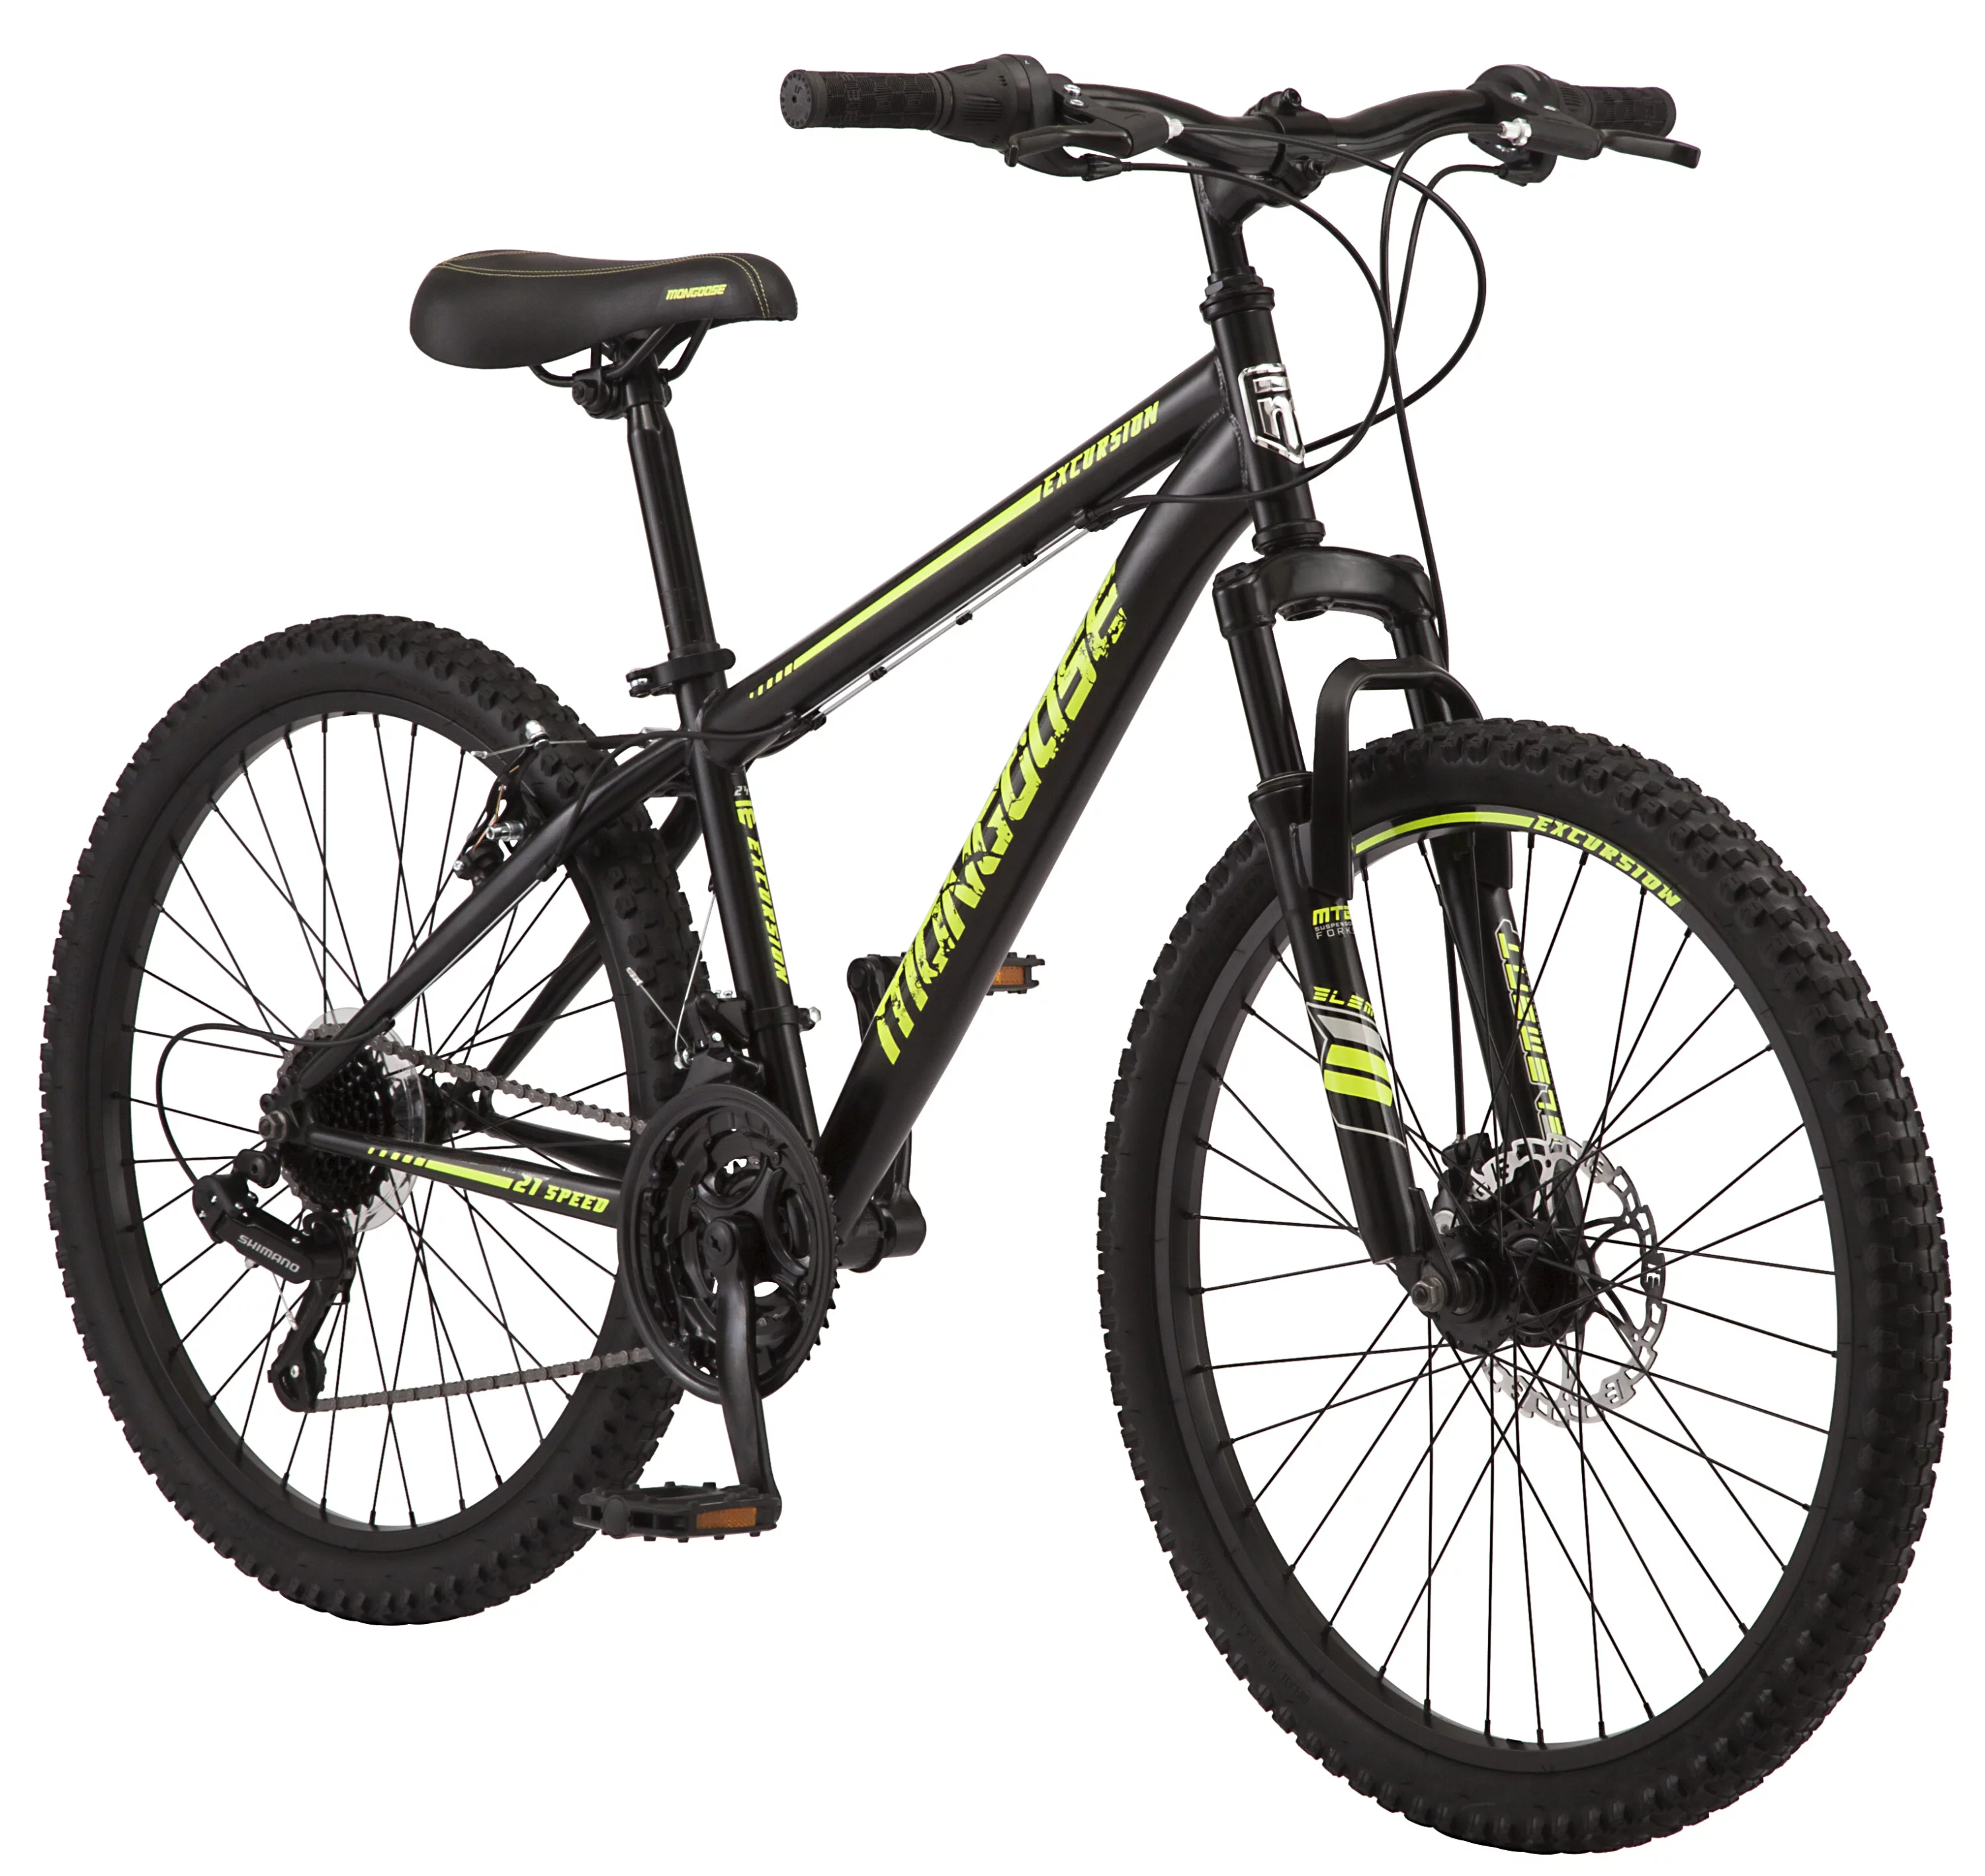 Mongoose 24-in. Excursion Unisex Mountain Bike, Black and Yellow, 21 Speeds